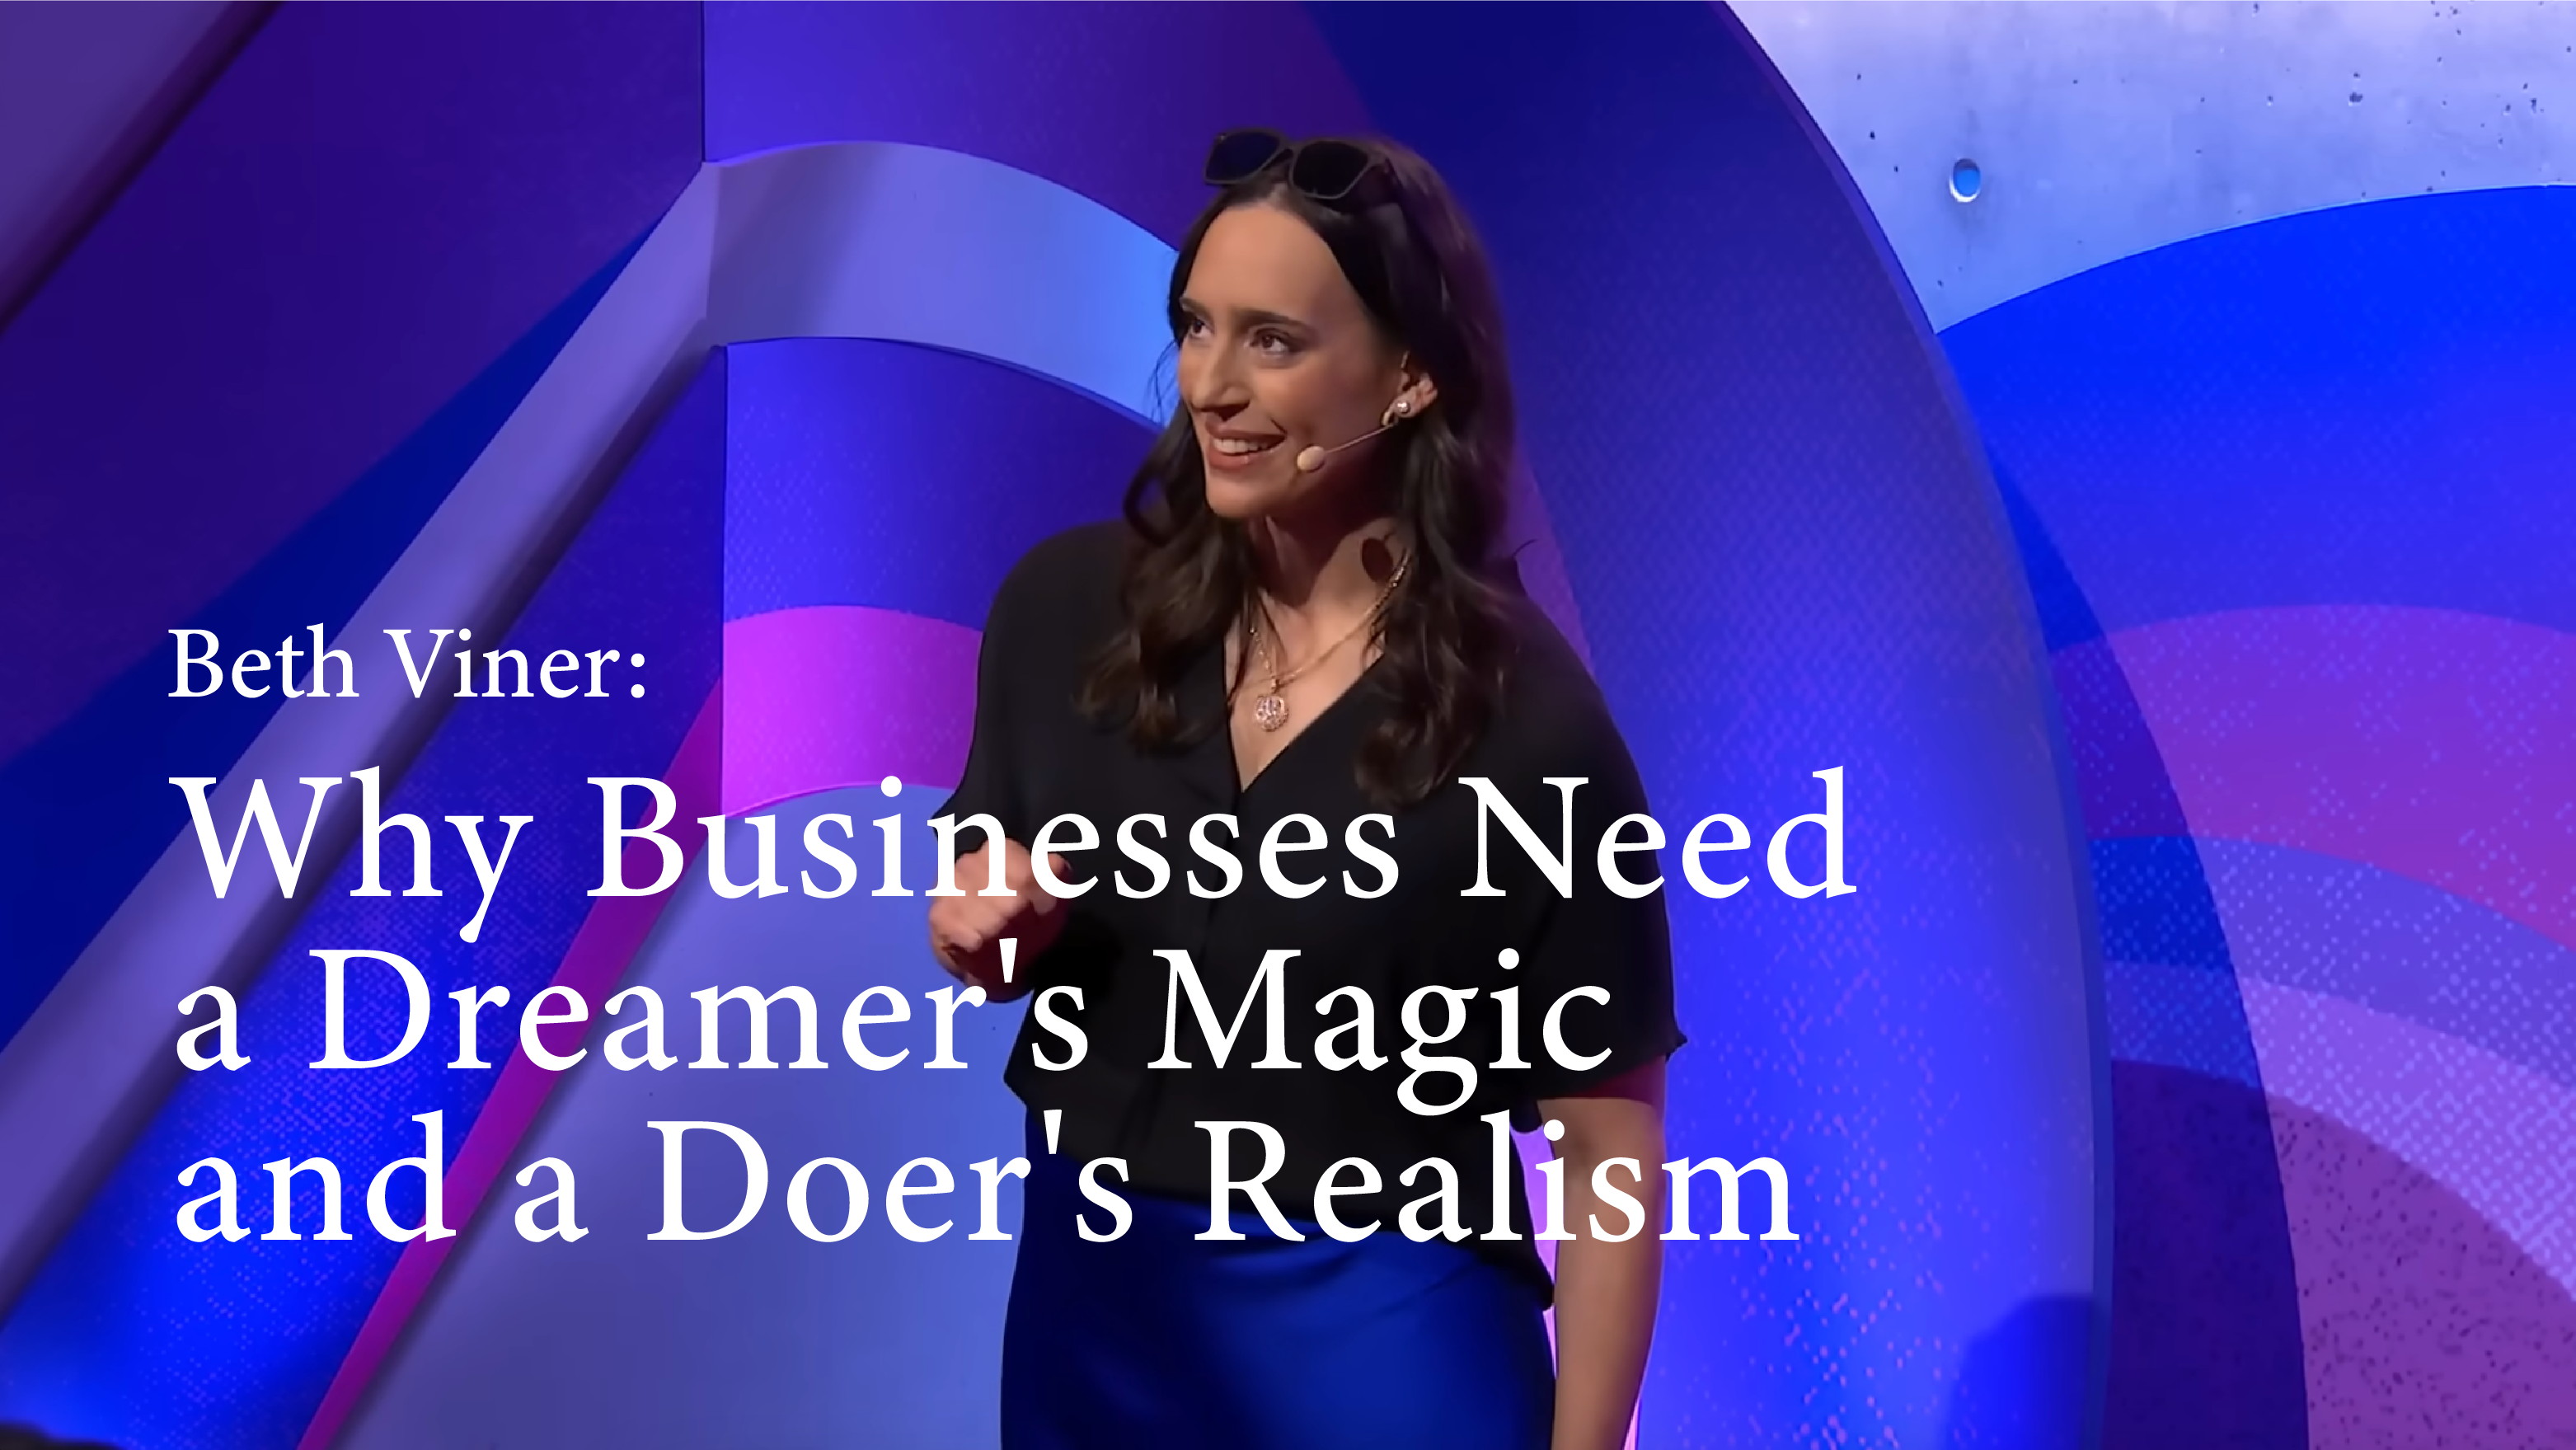 [C+] Why Businesses Need a Dreamer's Magic and a Doer's Realism [PRACTICE]